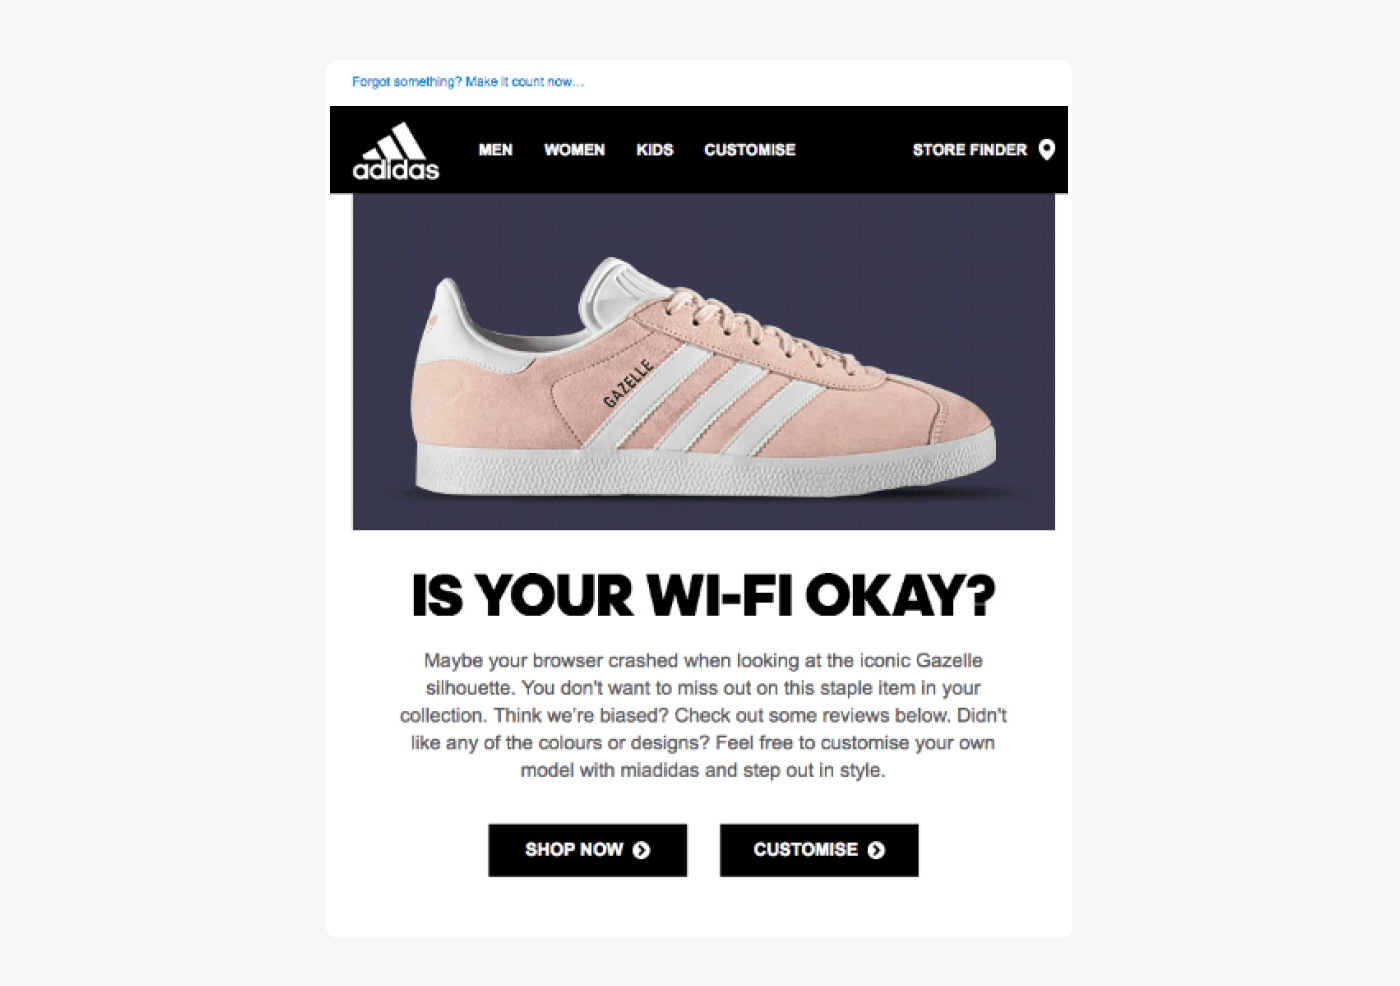 adidas' abandoned cart email examples